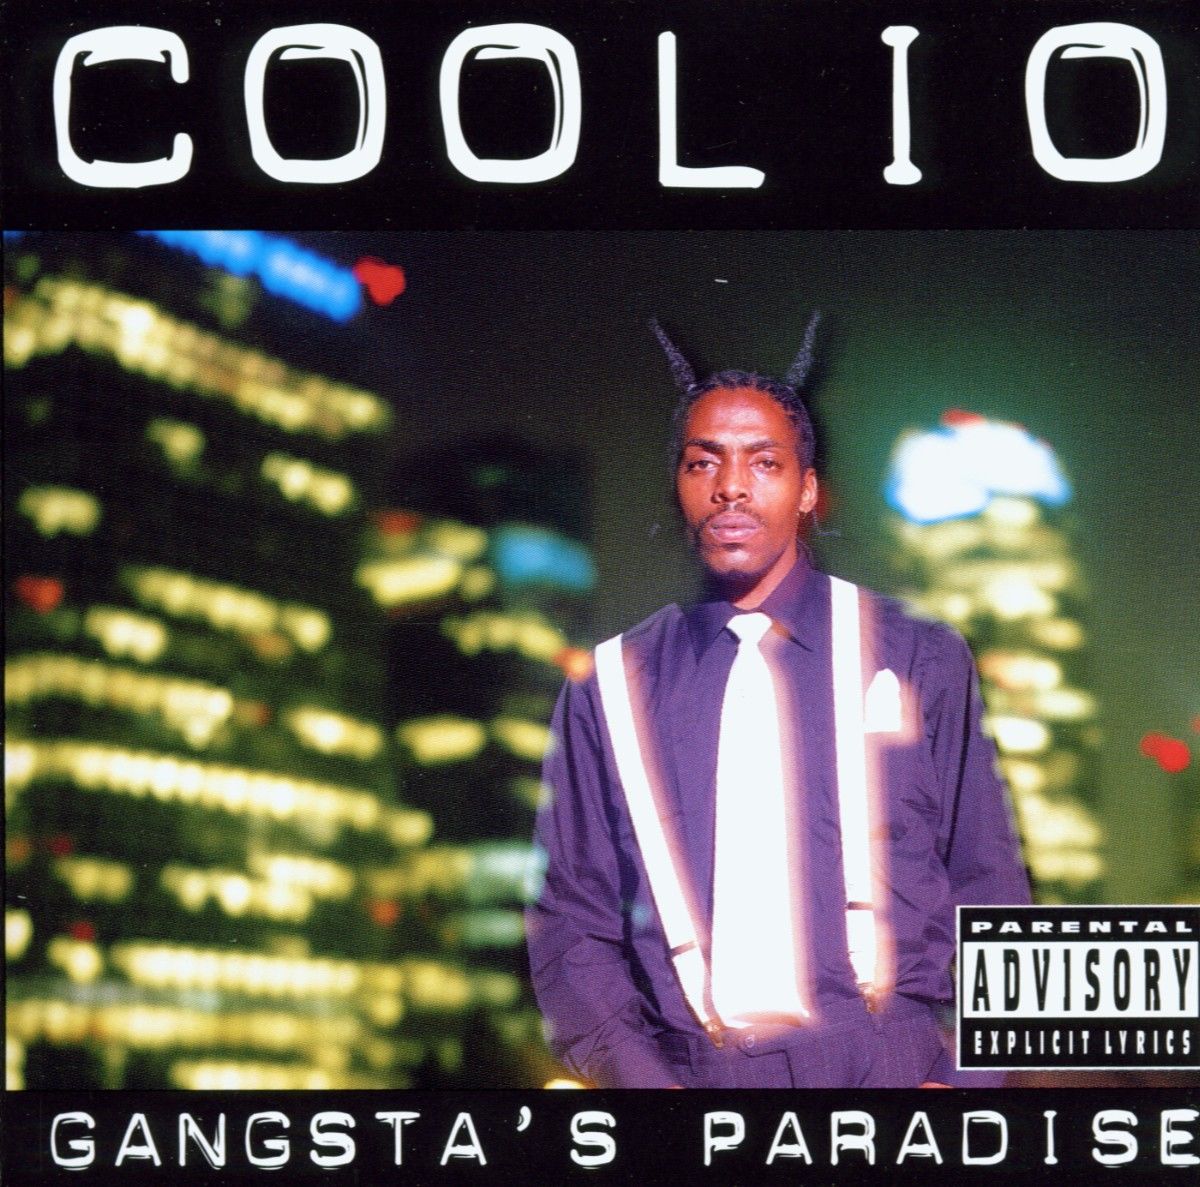 A Fond : Coolio - "Too Hot" 3